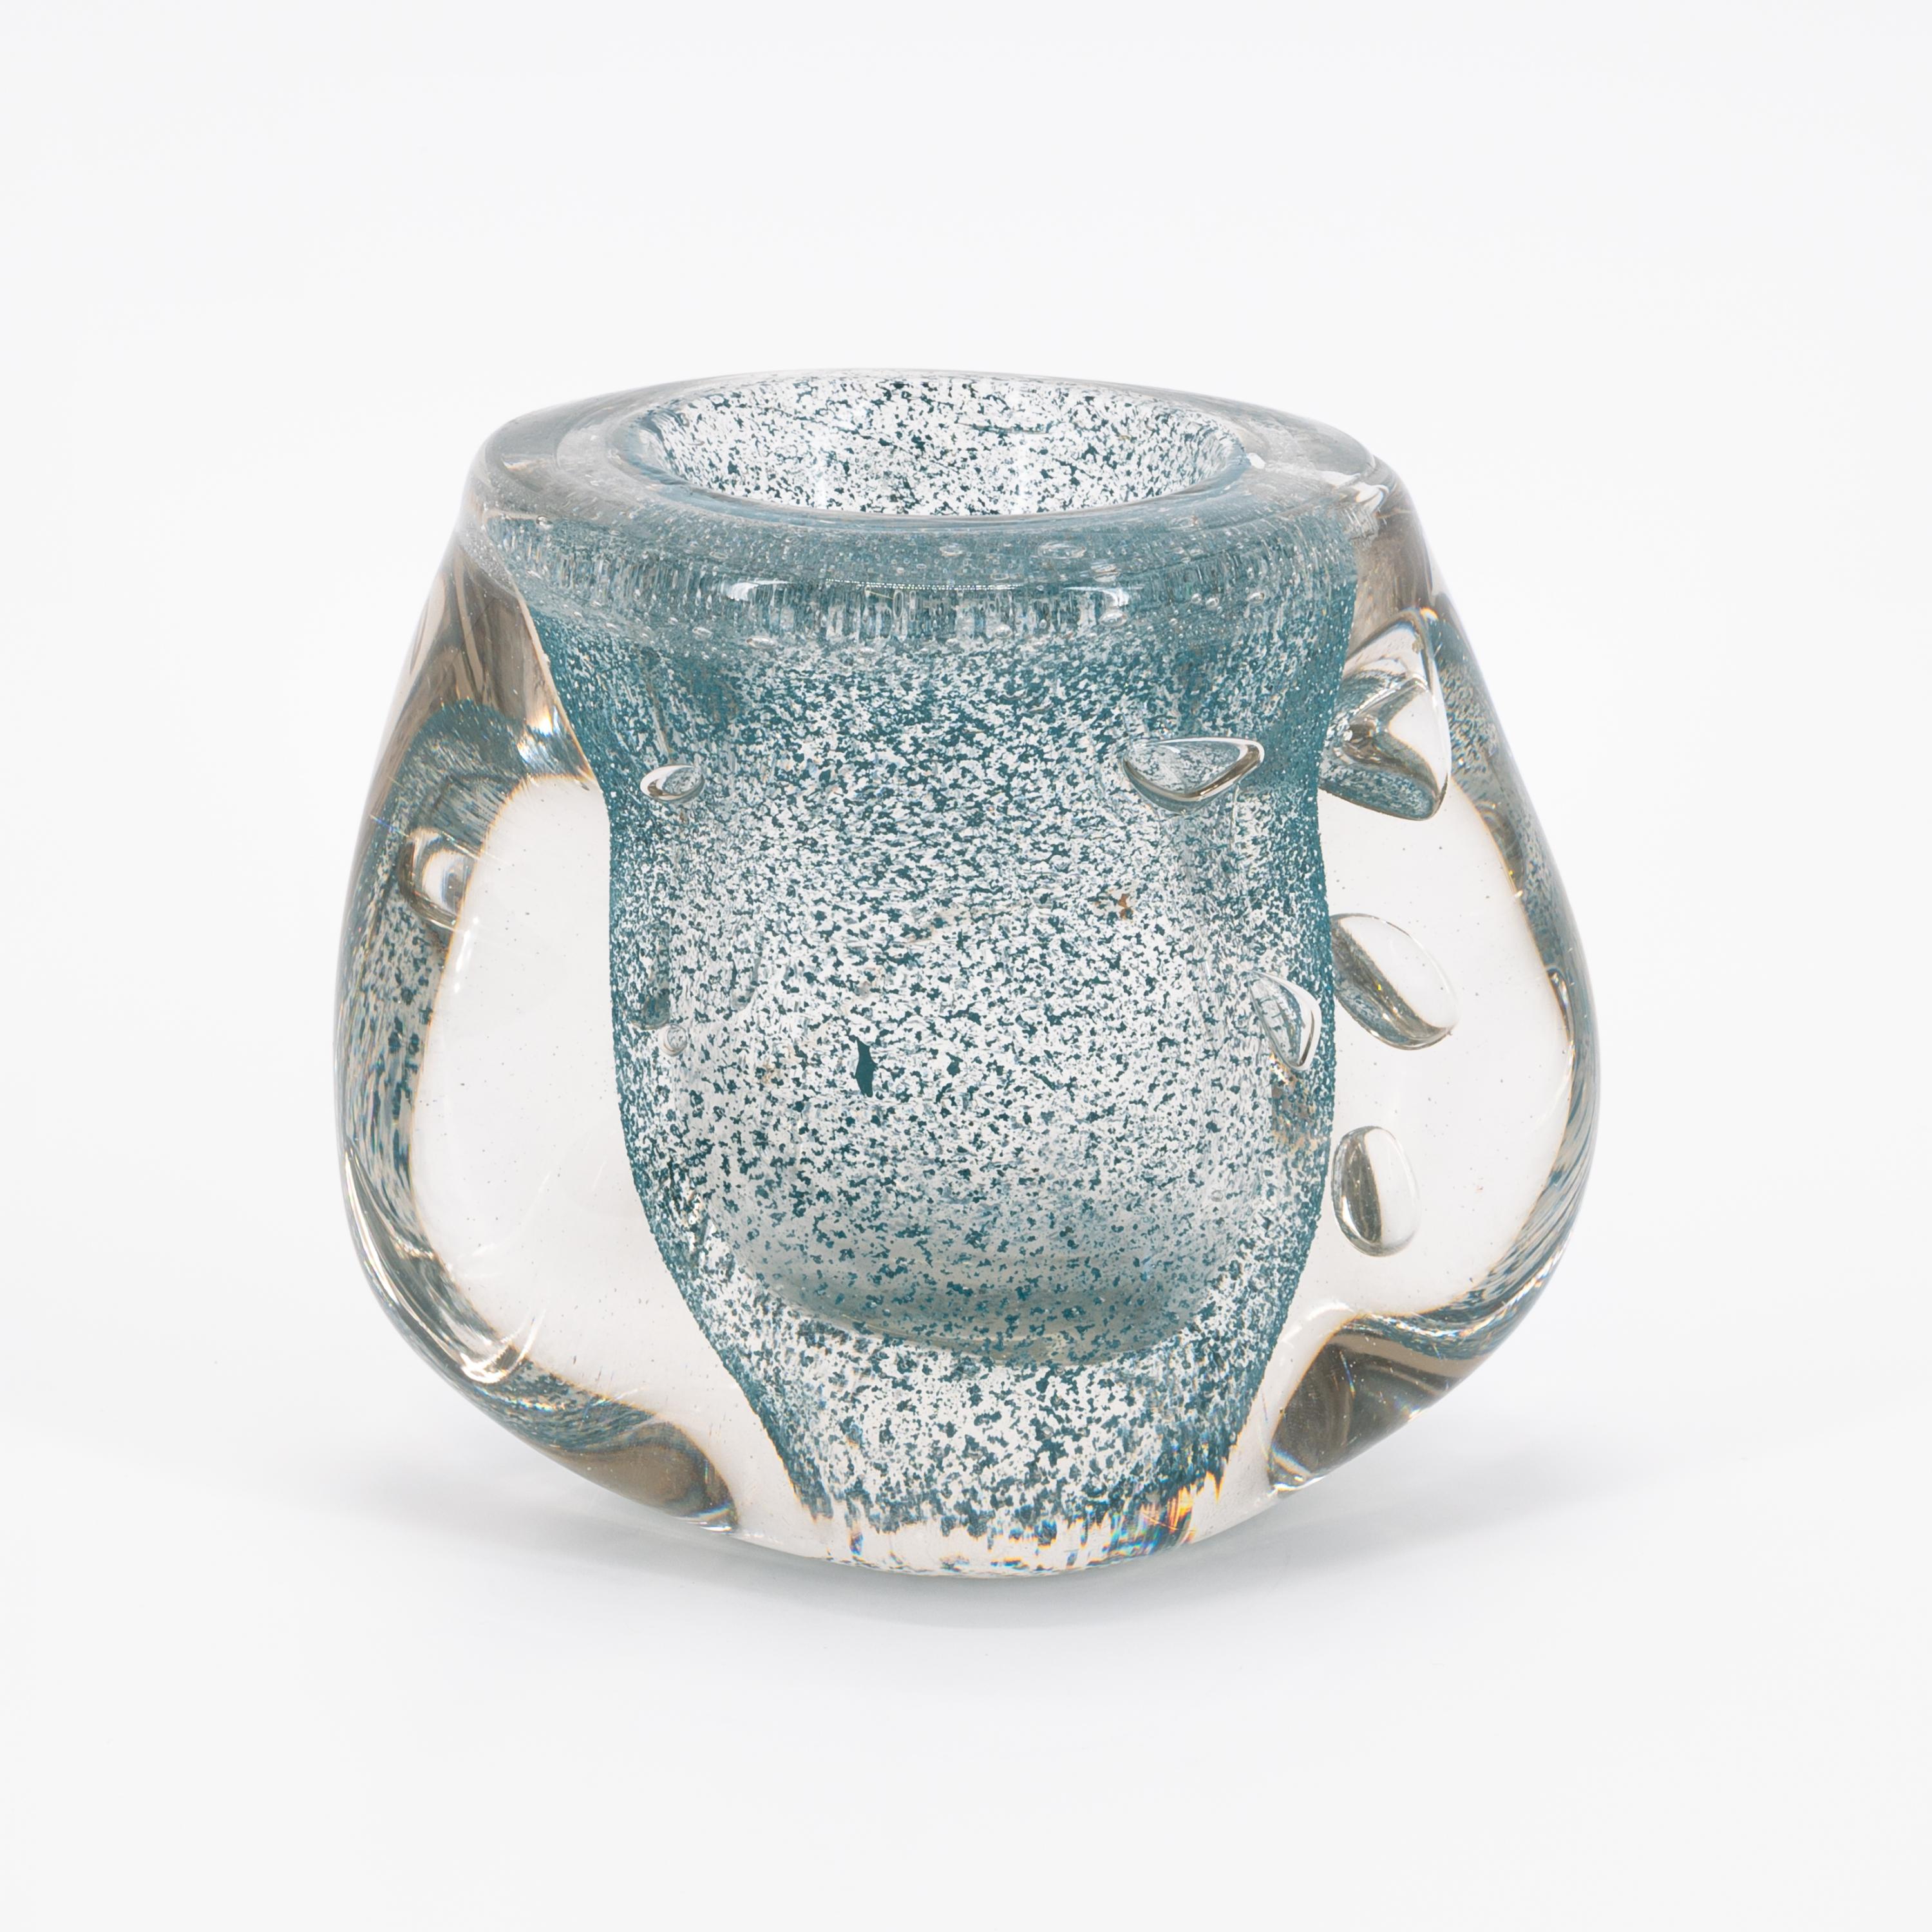 GLASS VASE WITH TURQUOISE BLUE POWDER INCLUSIONS - Image 3 of 6